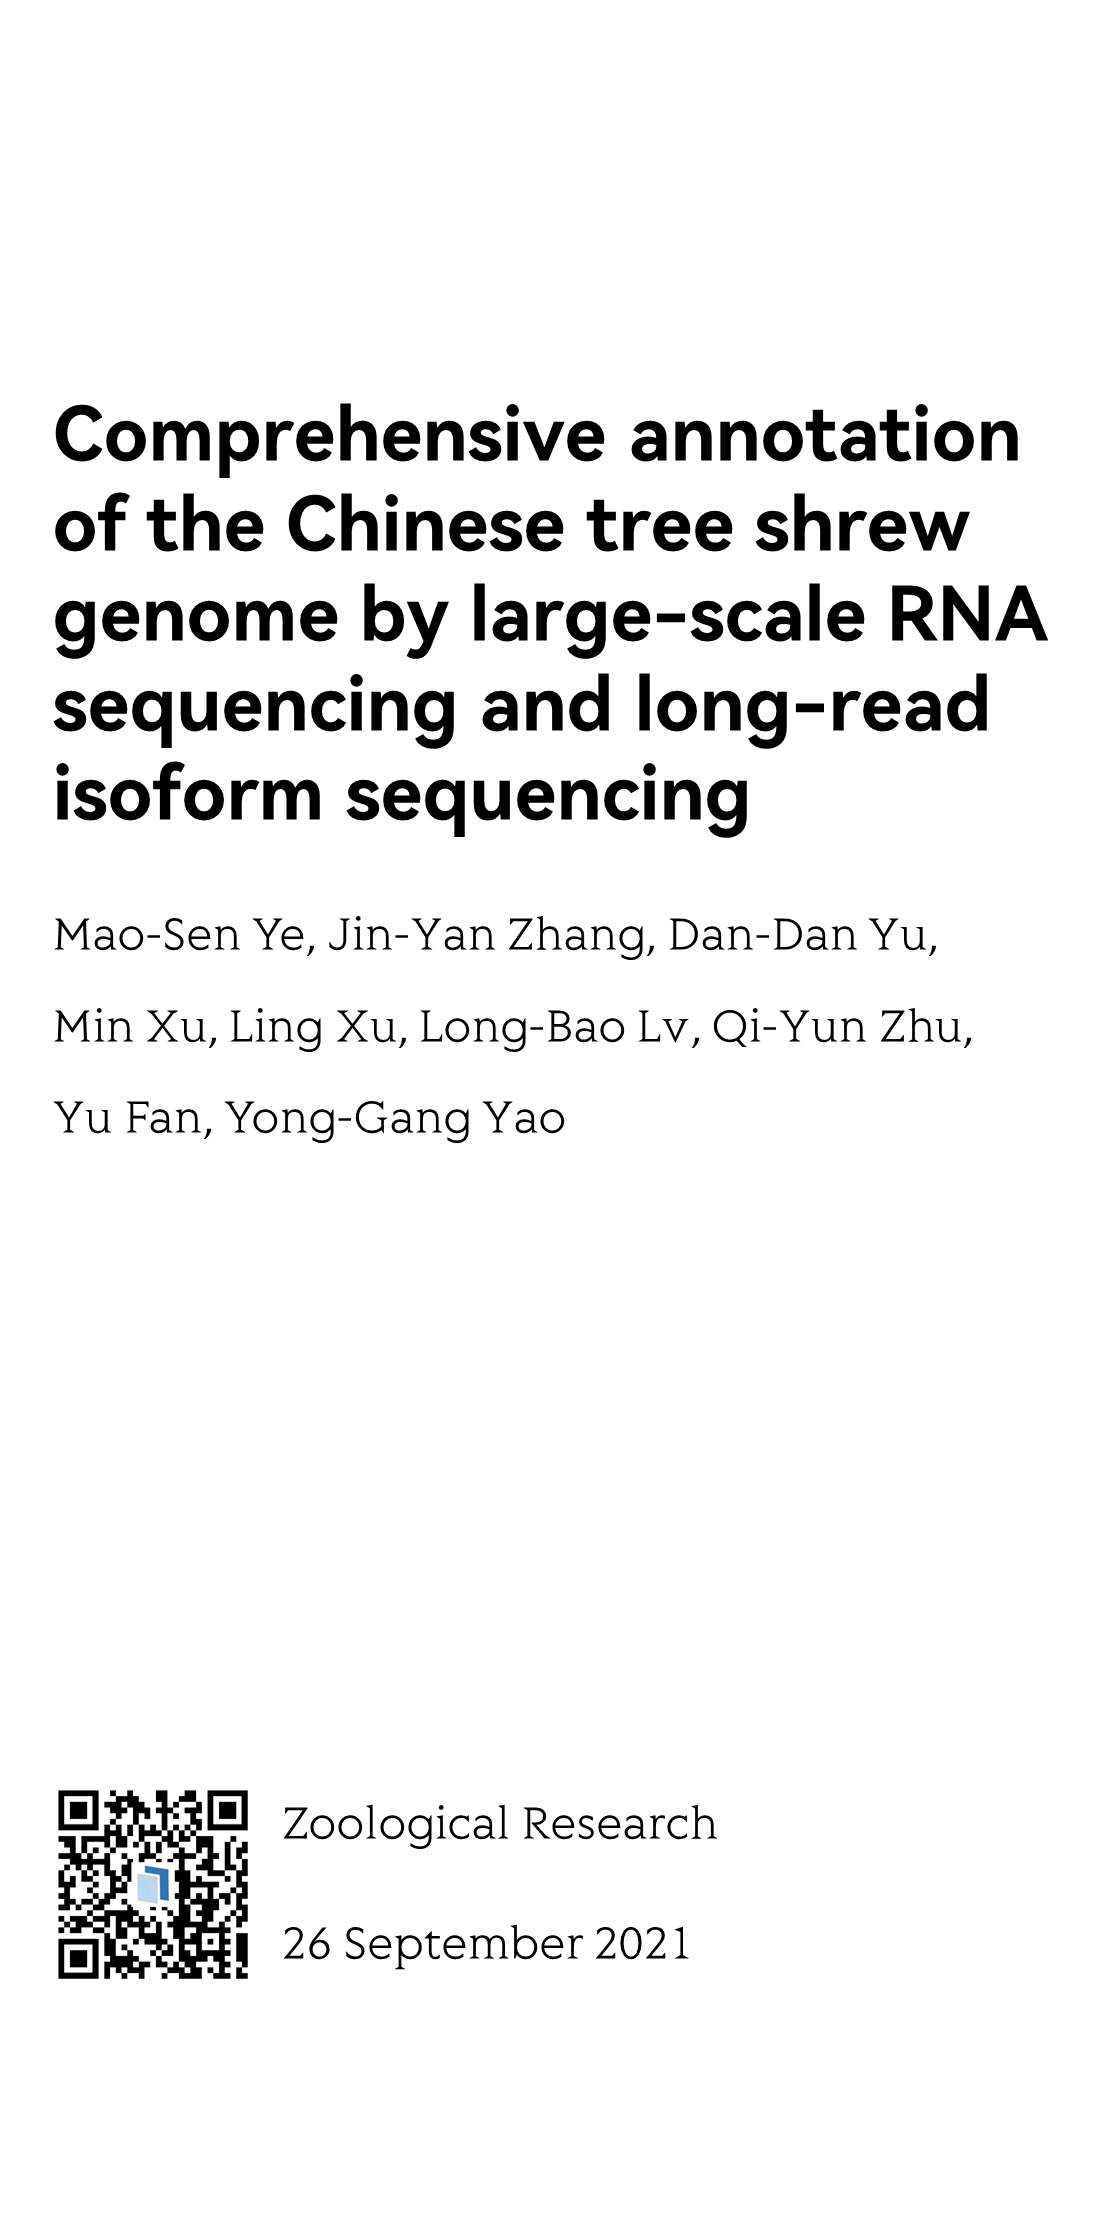 Comprehensive annotation of the Chinese tree shrew genome by large-scale RNA sequencing and long-read isoform sequencing_1